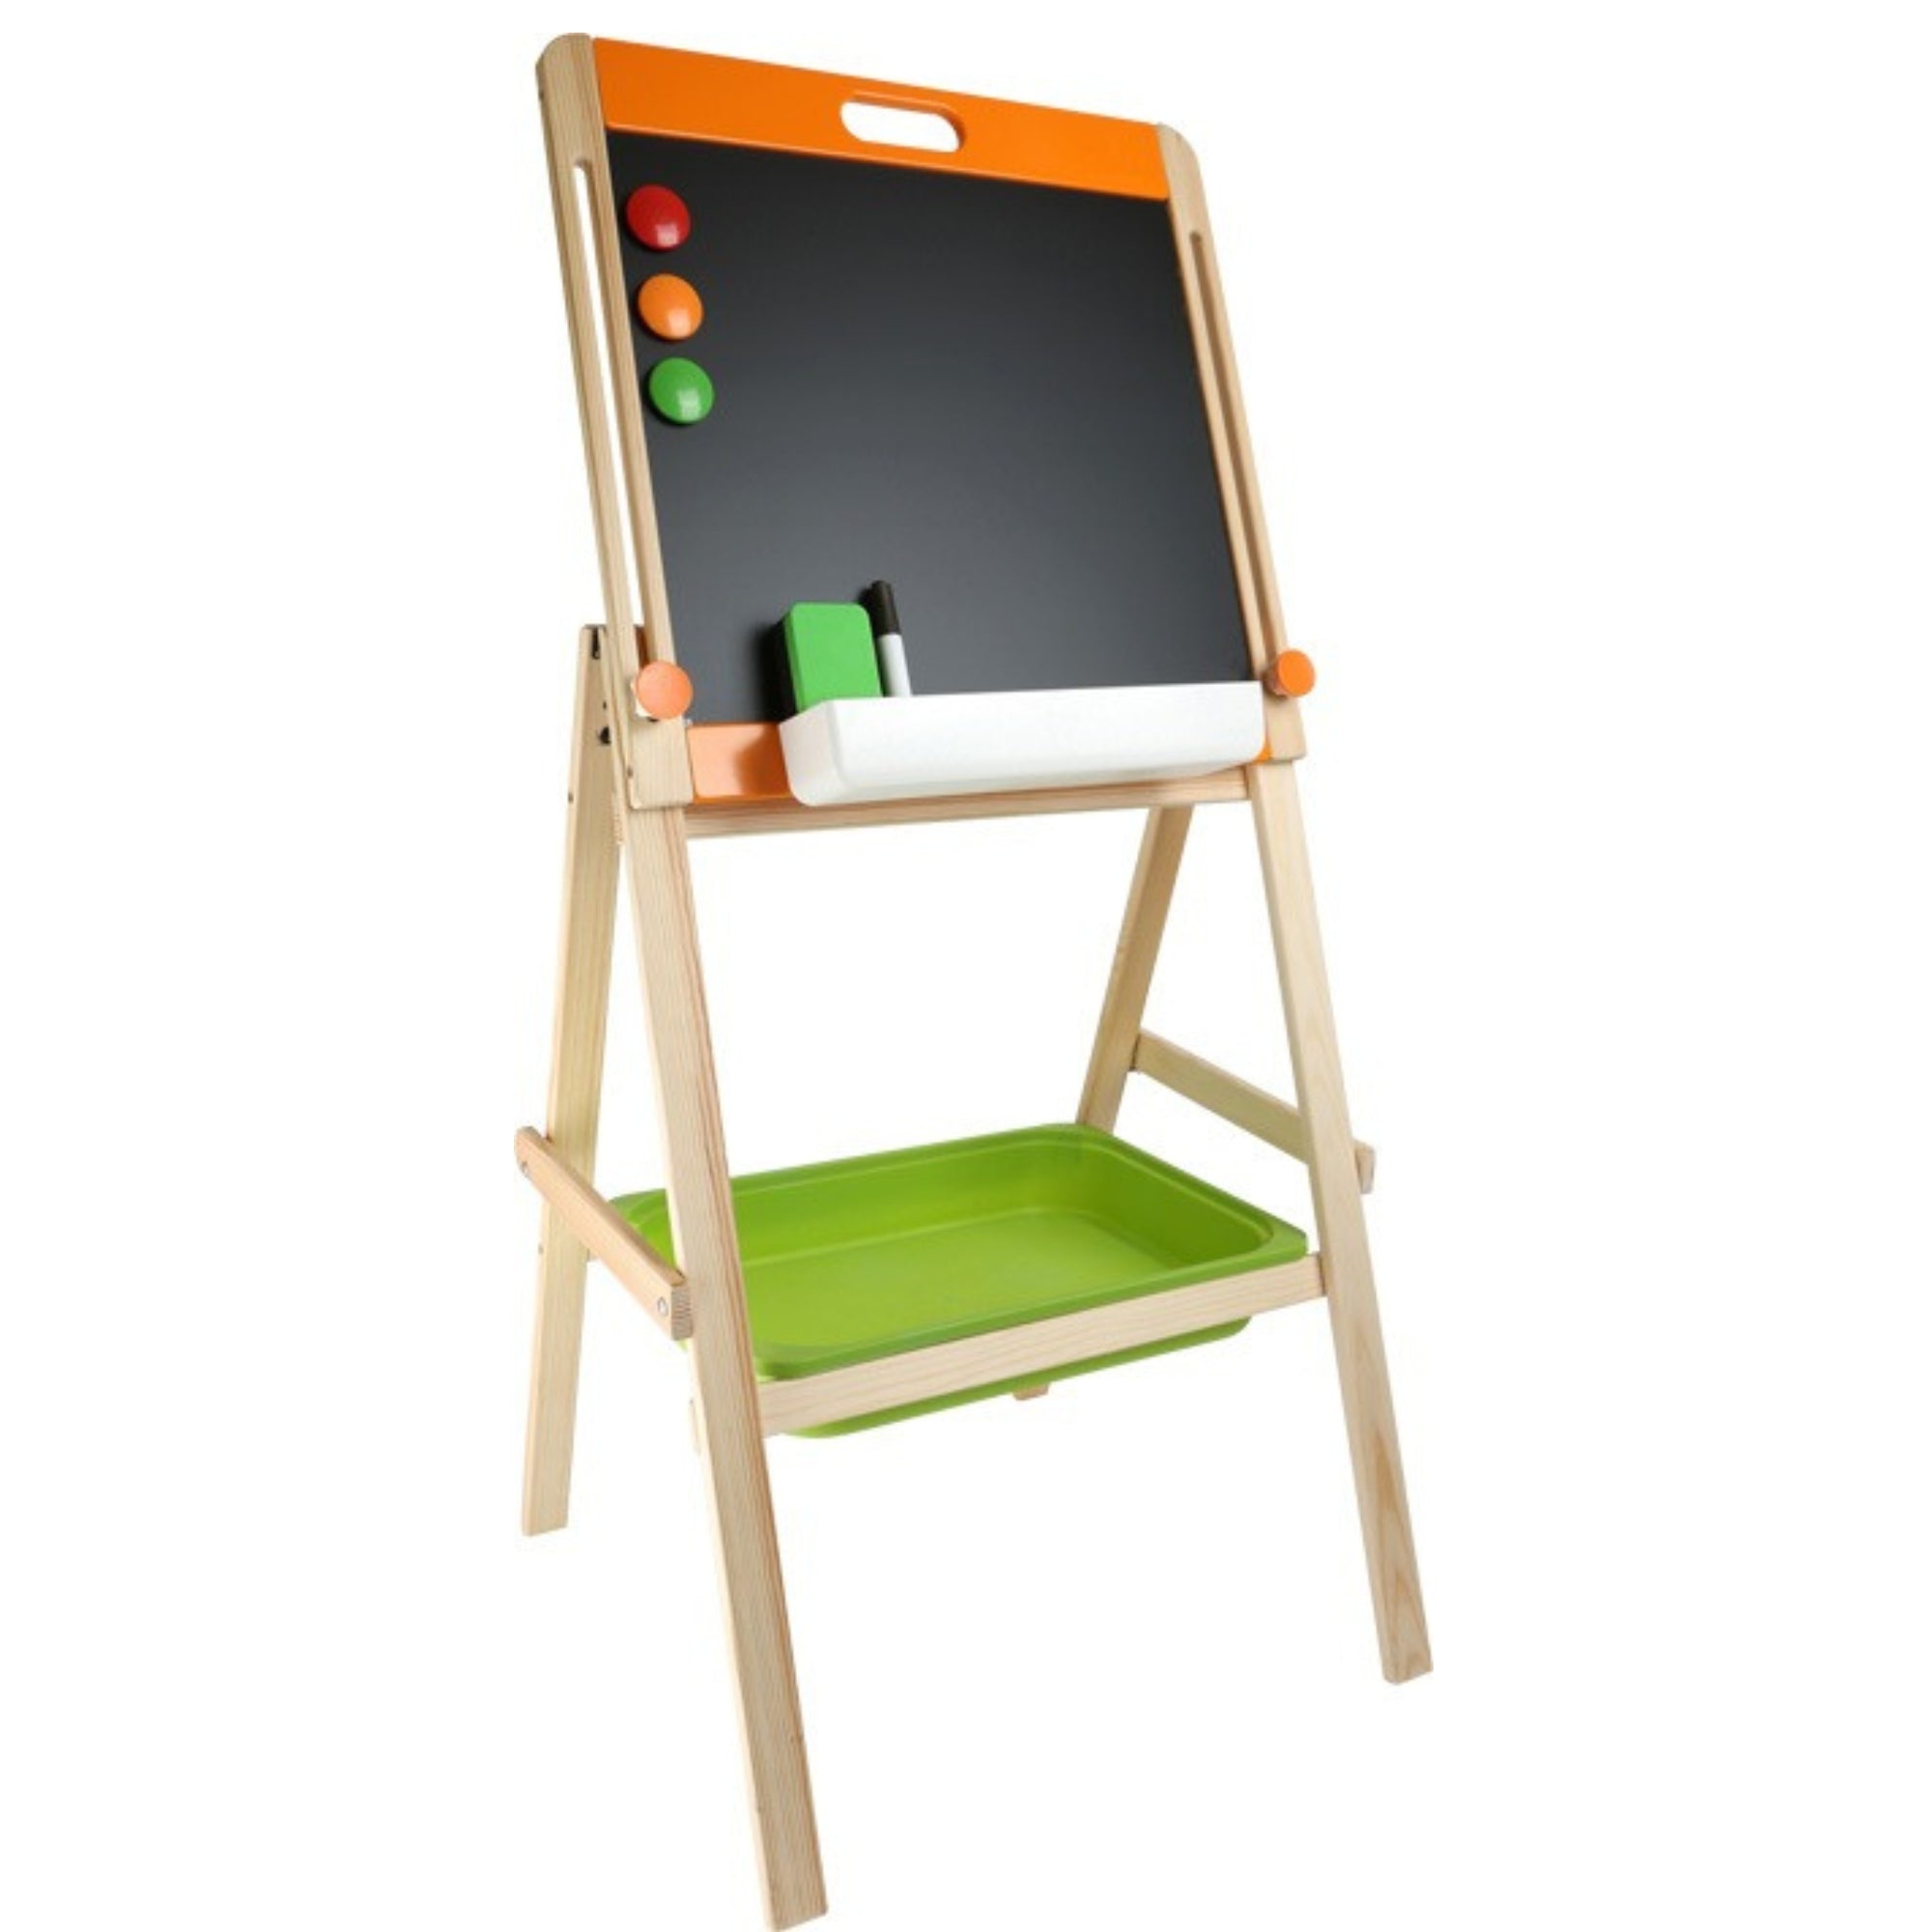 Chalk and Magnet Board, This 2-in-1 chalk and magnet board is the perfect addition to any learning environment. Made of high-quality wood, this board offers two different surfaces for writing - one side is perfect for chalk and the other side is compatible with felt-tip pens. The versatility of this Chalk and Magnet Board allows children to explore their creativity using different materials.In addition to its dual functionality, this Chalk and Magnet Board also includes magnetic capabilities. Four magnets a